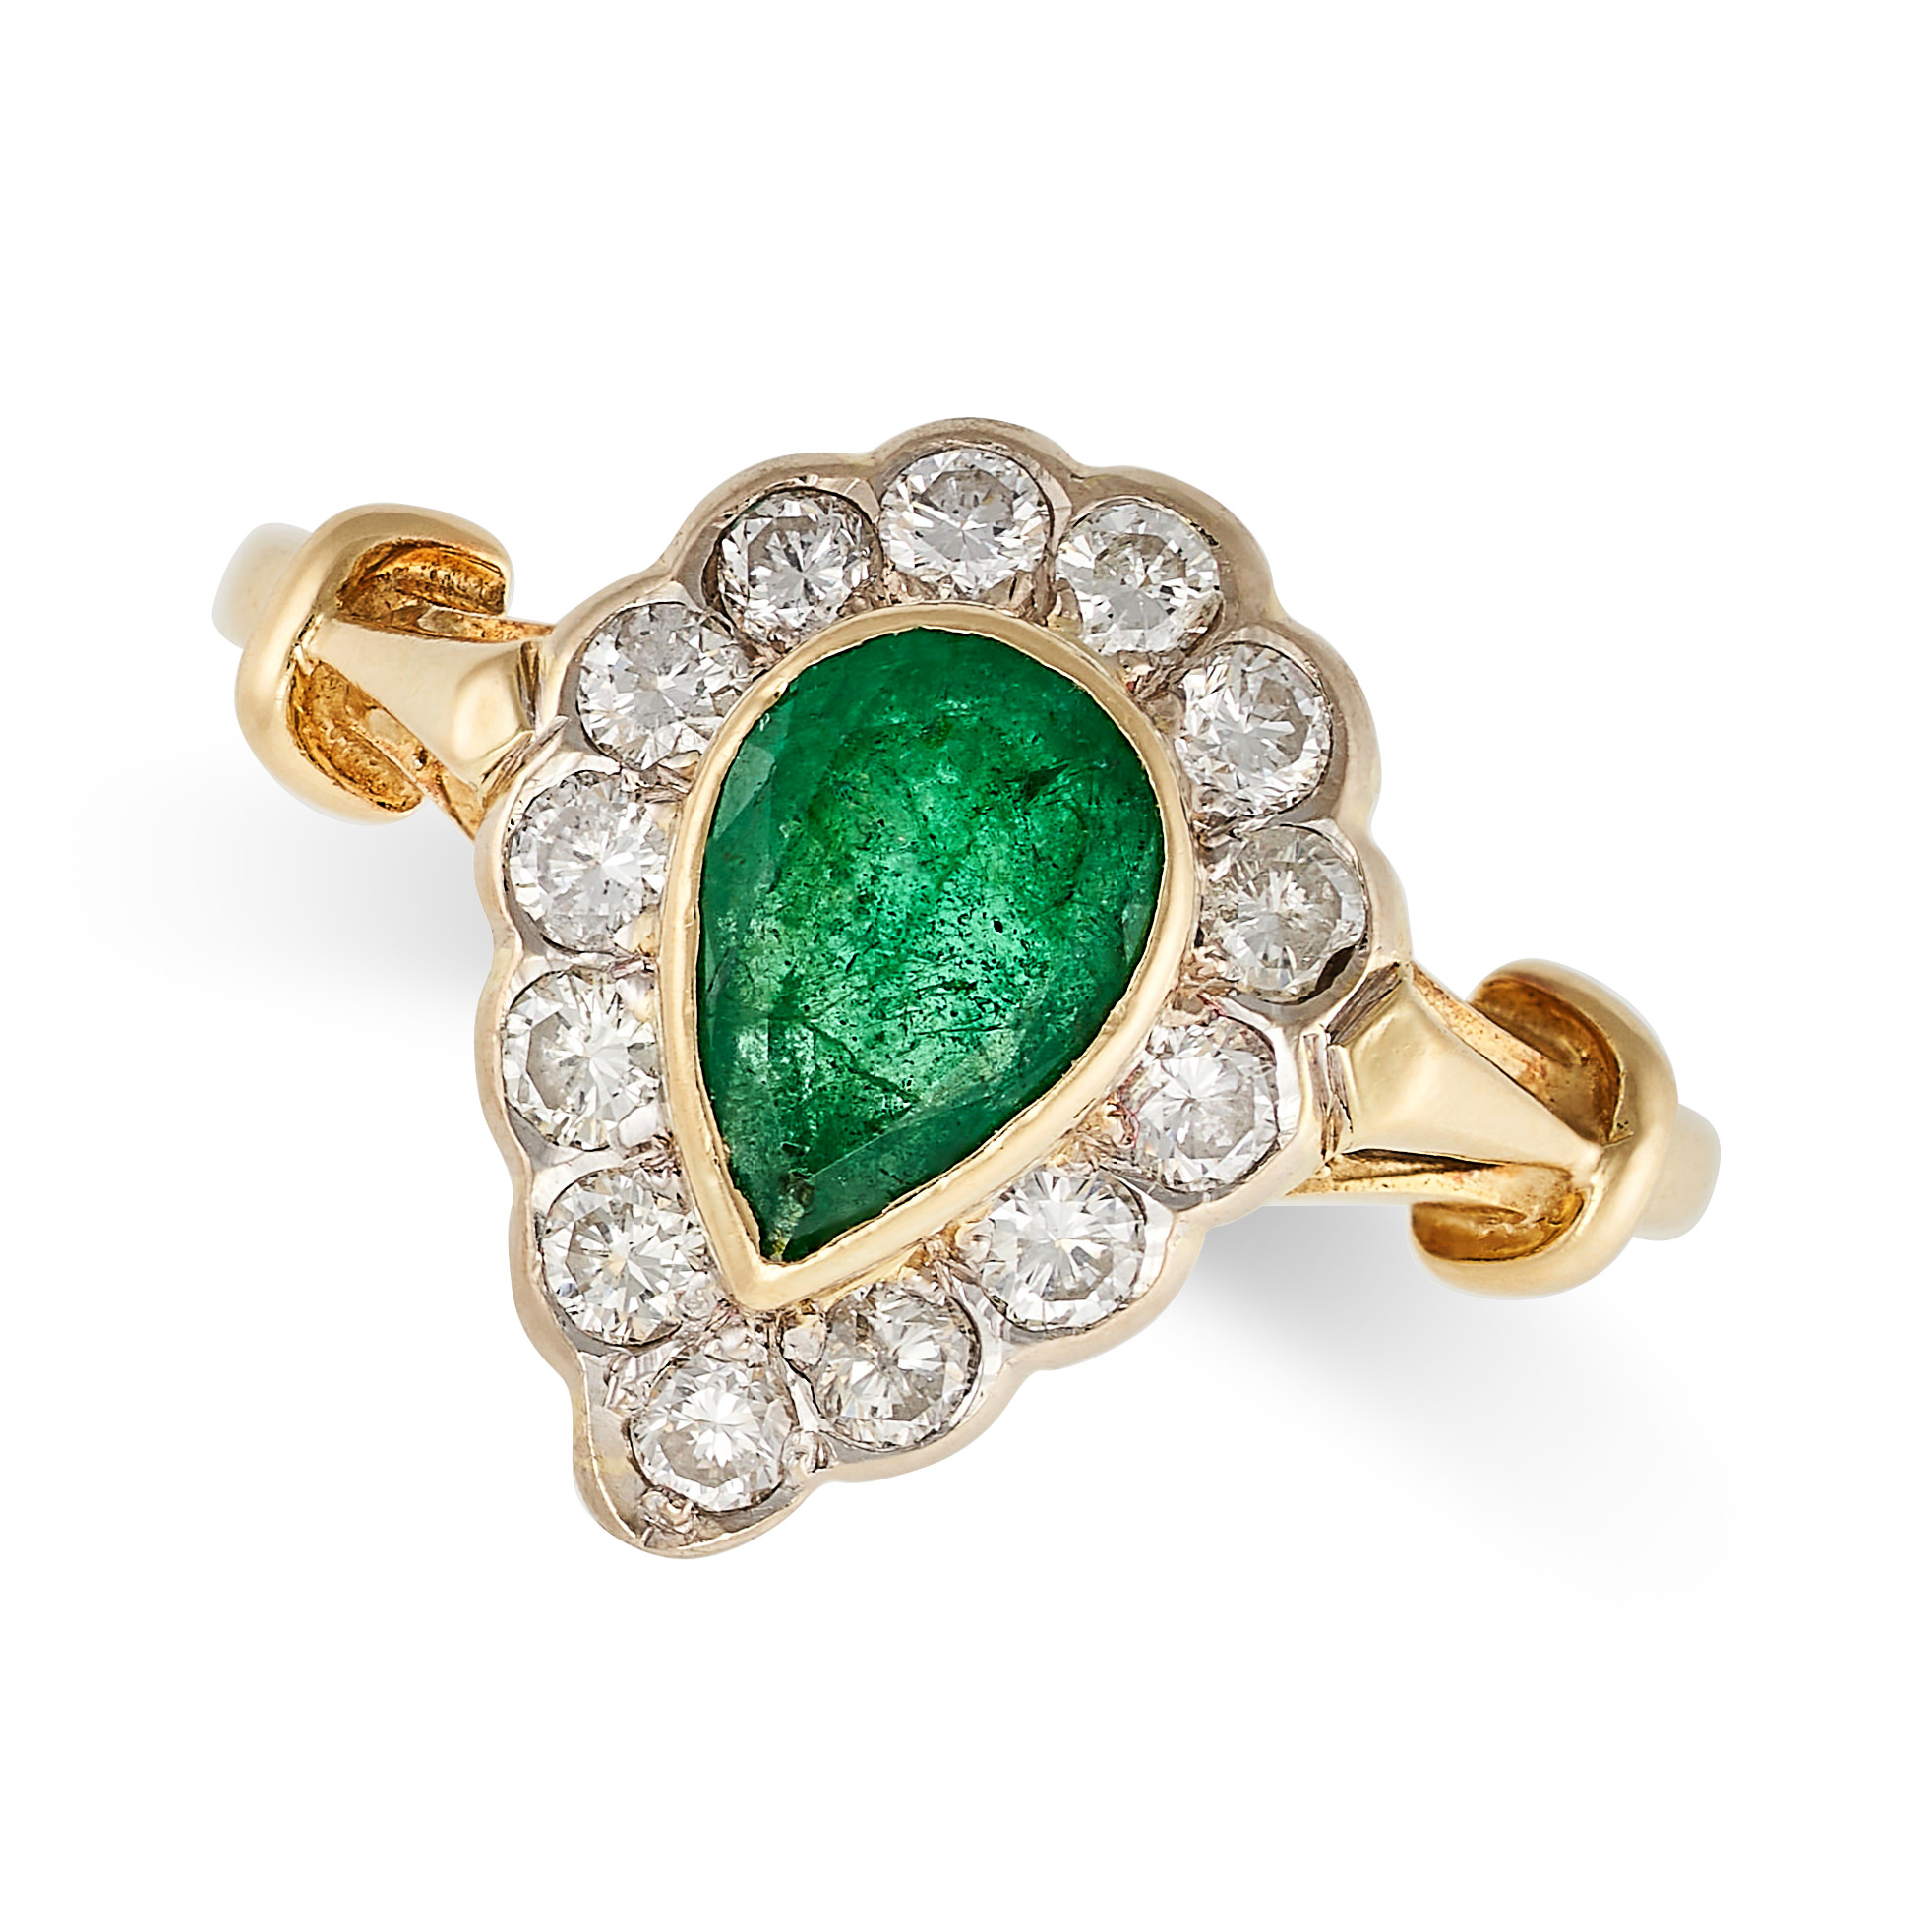 AN EMERALD AND DIAMOND RING in 18ct yellow gold, set with a pear shaped emerald in a cluster of